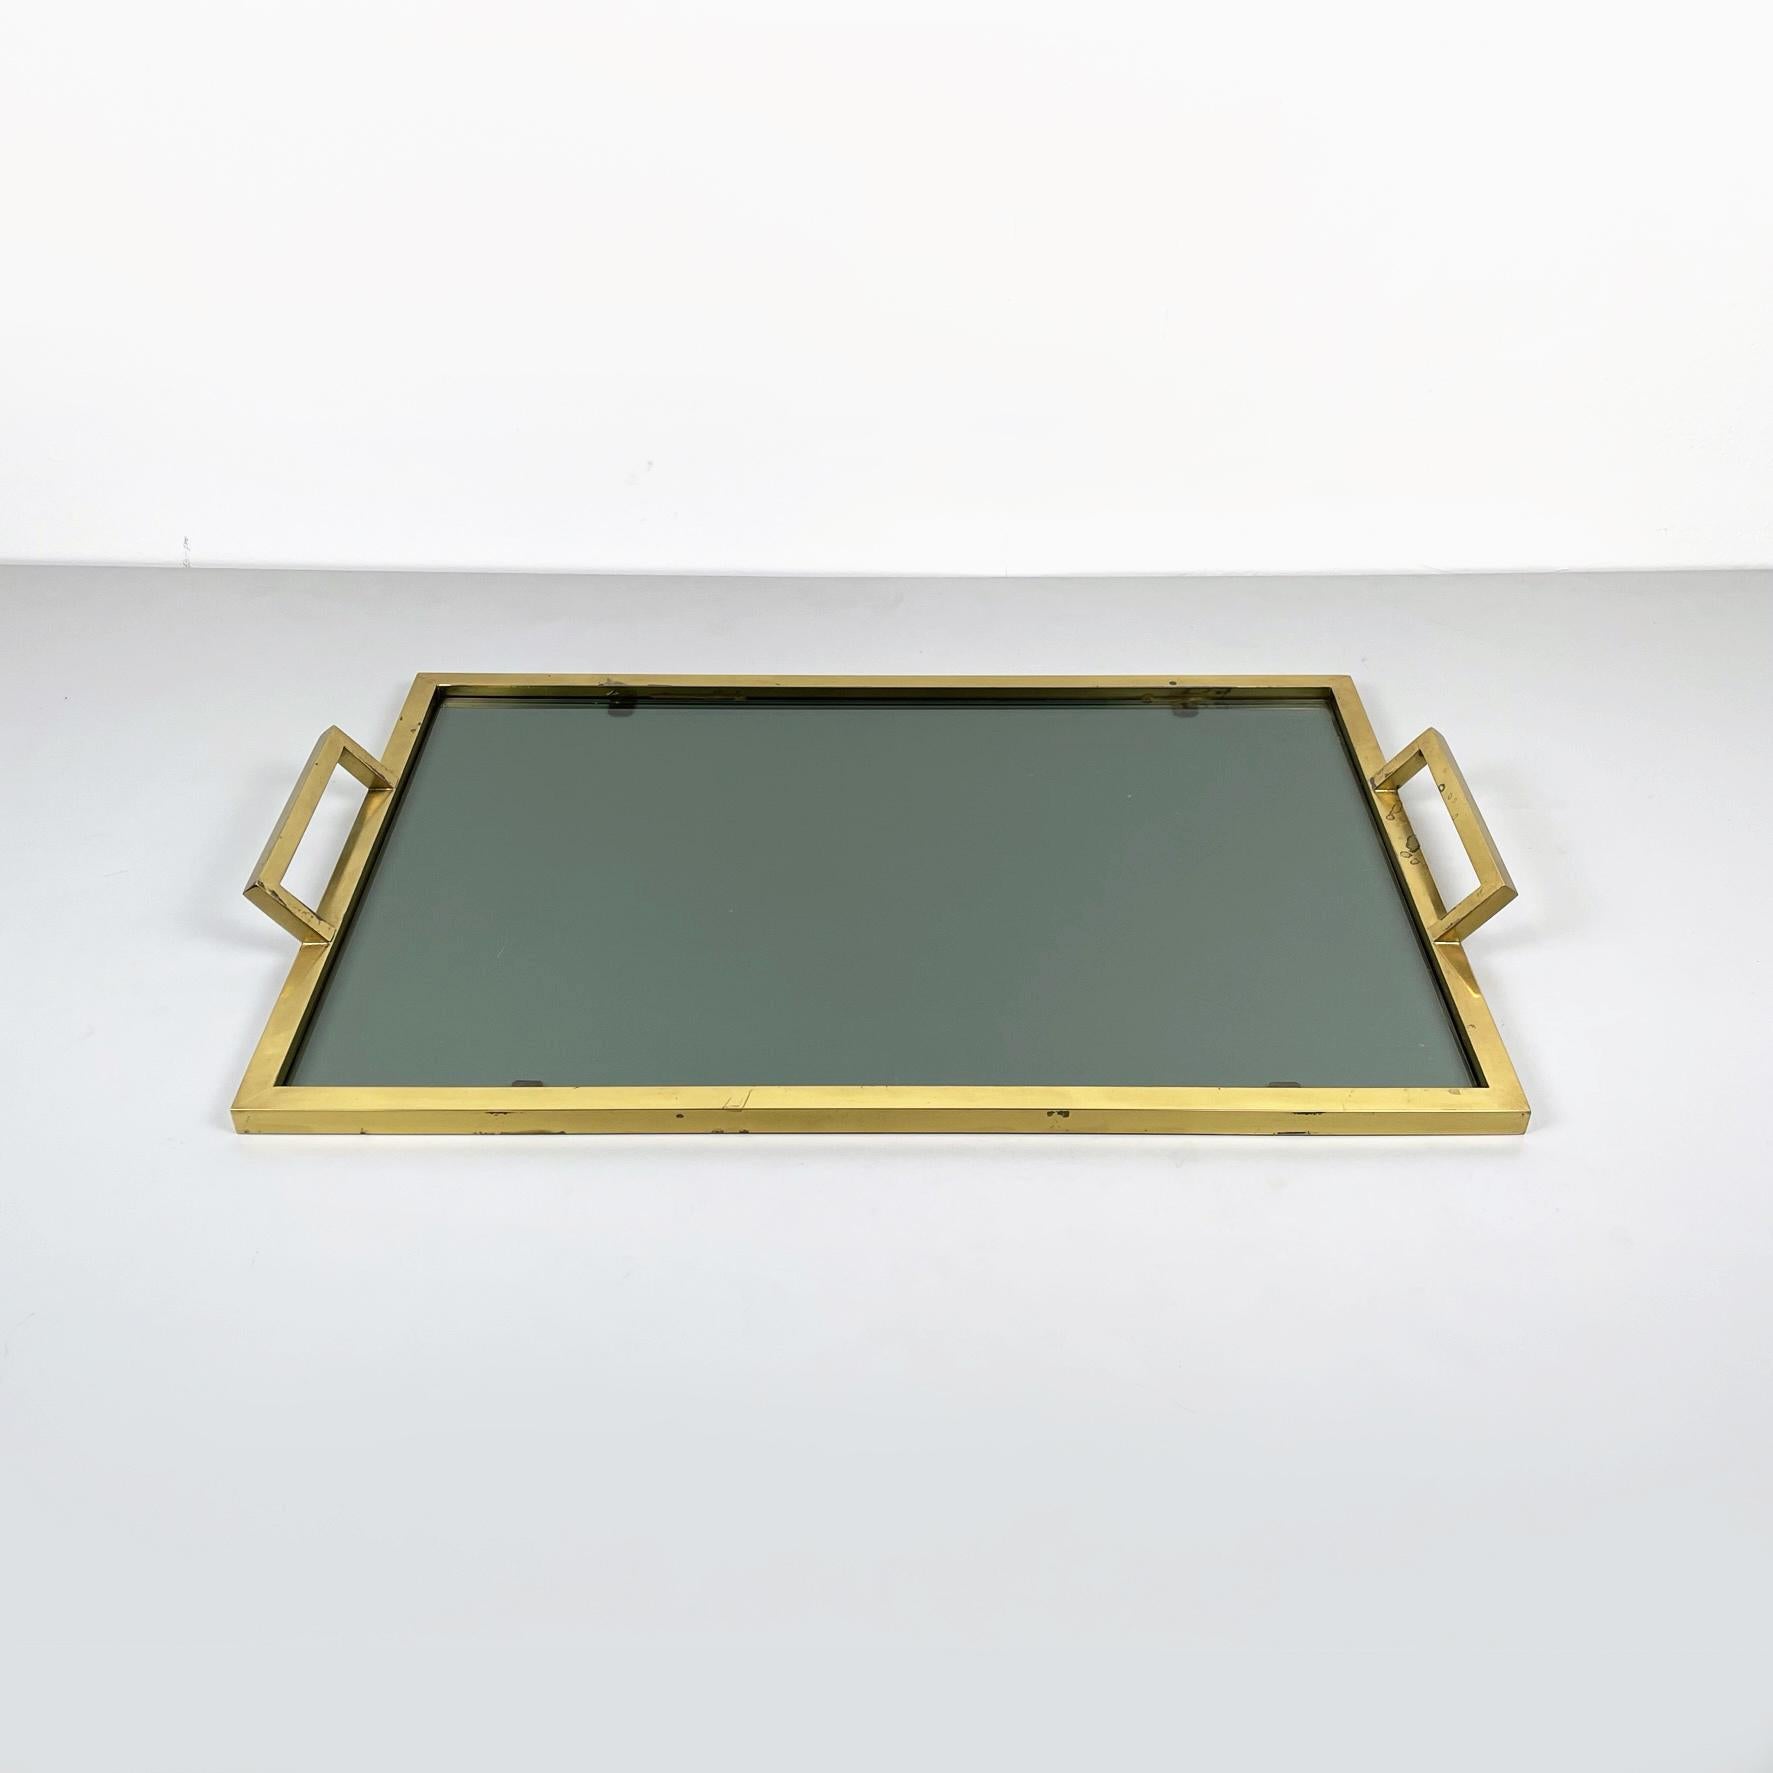 Italian mid-century Rectangular tray in brass and smoked glass, 1960s
Tray with rectangular top in smoked glass. The structure and the two handles are square section and entirely in brass. It can be used as a serving tray or as a decorative